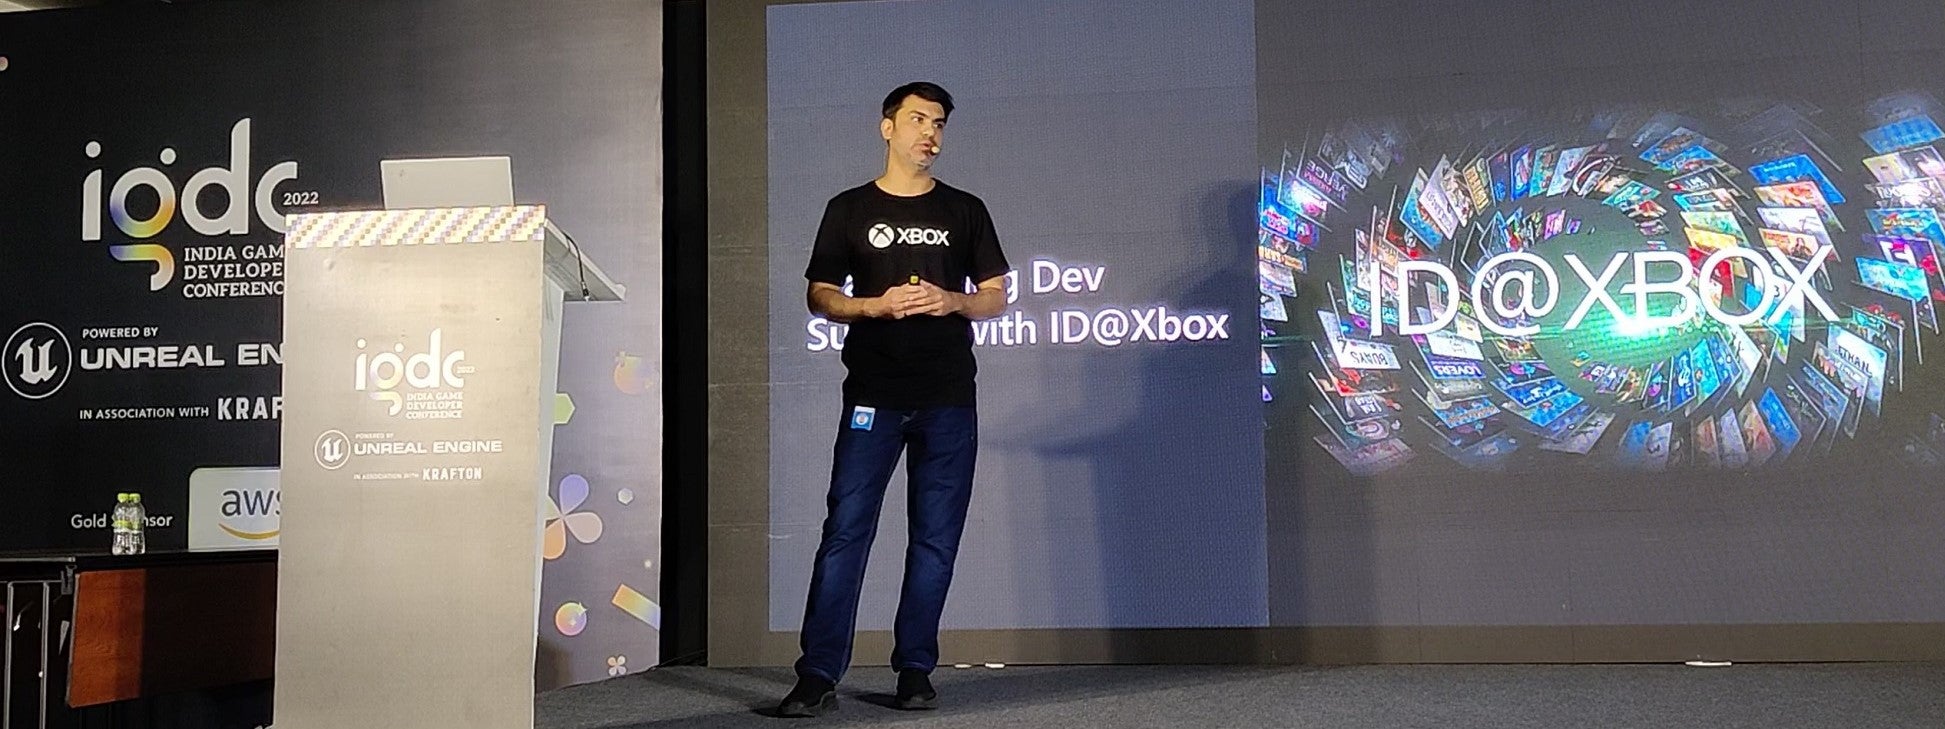 Image for Xbox: "We want to build on the potential we’re seeing in India"